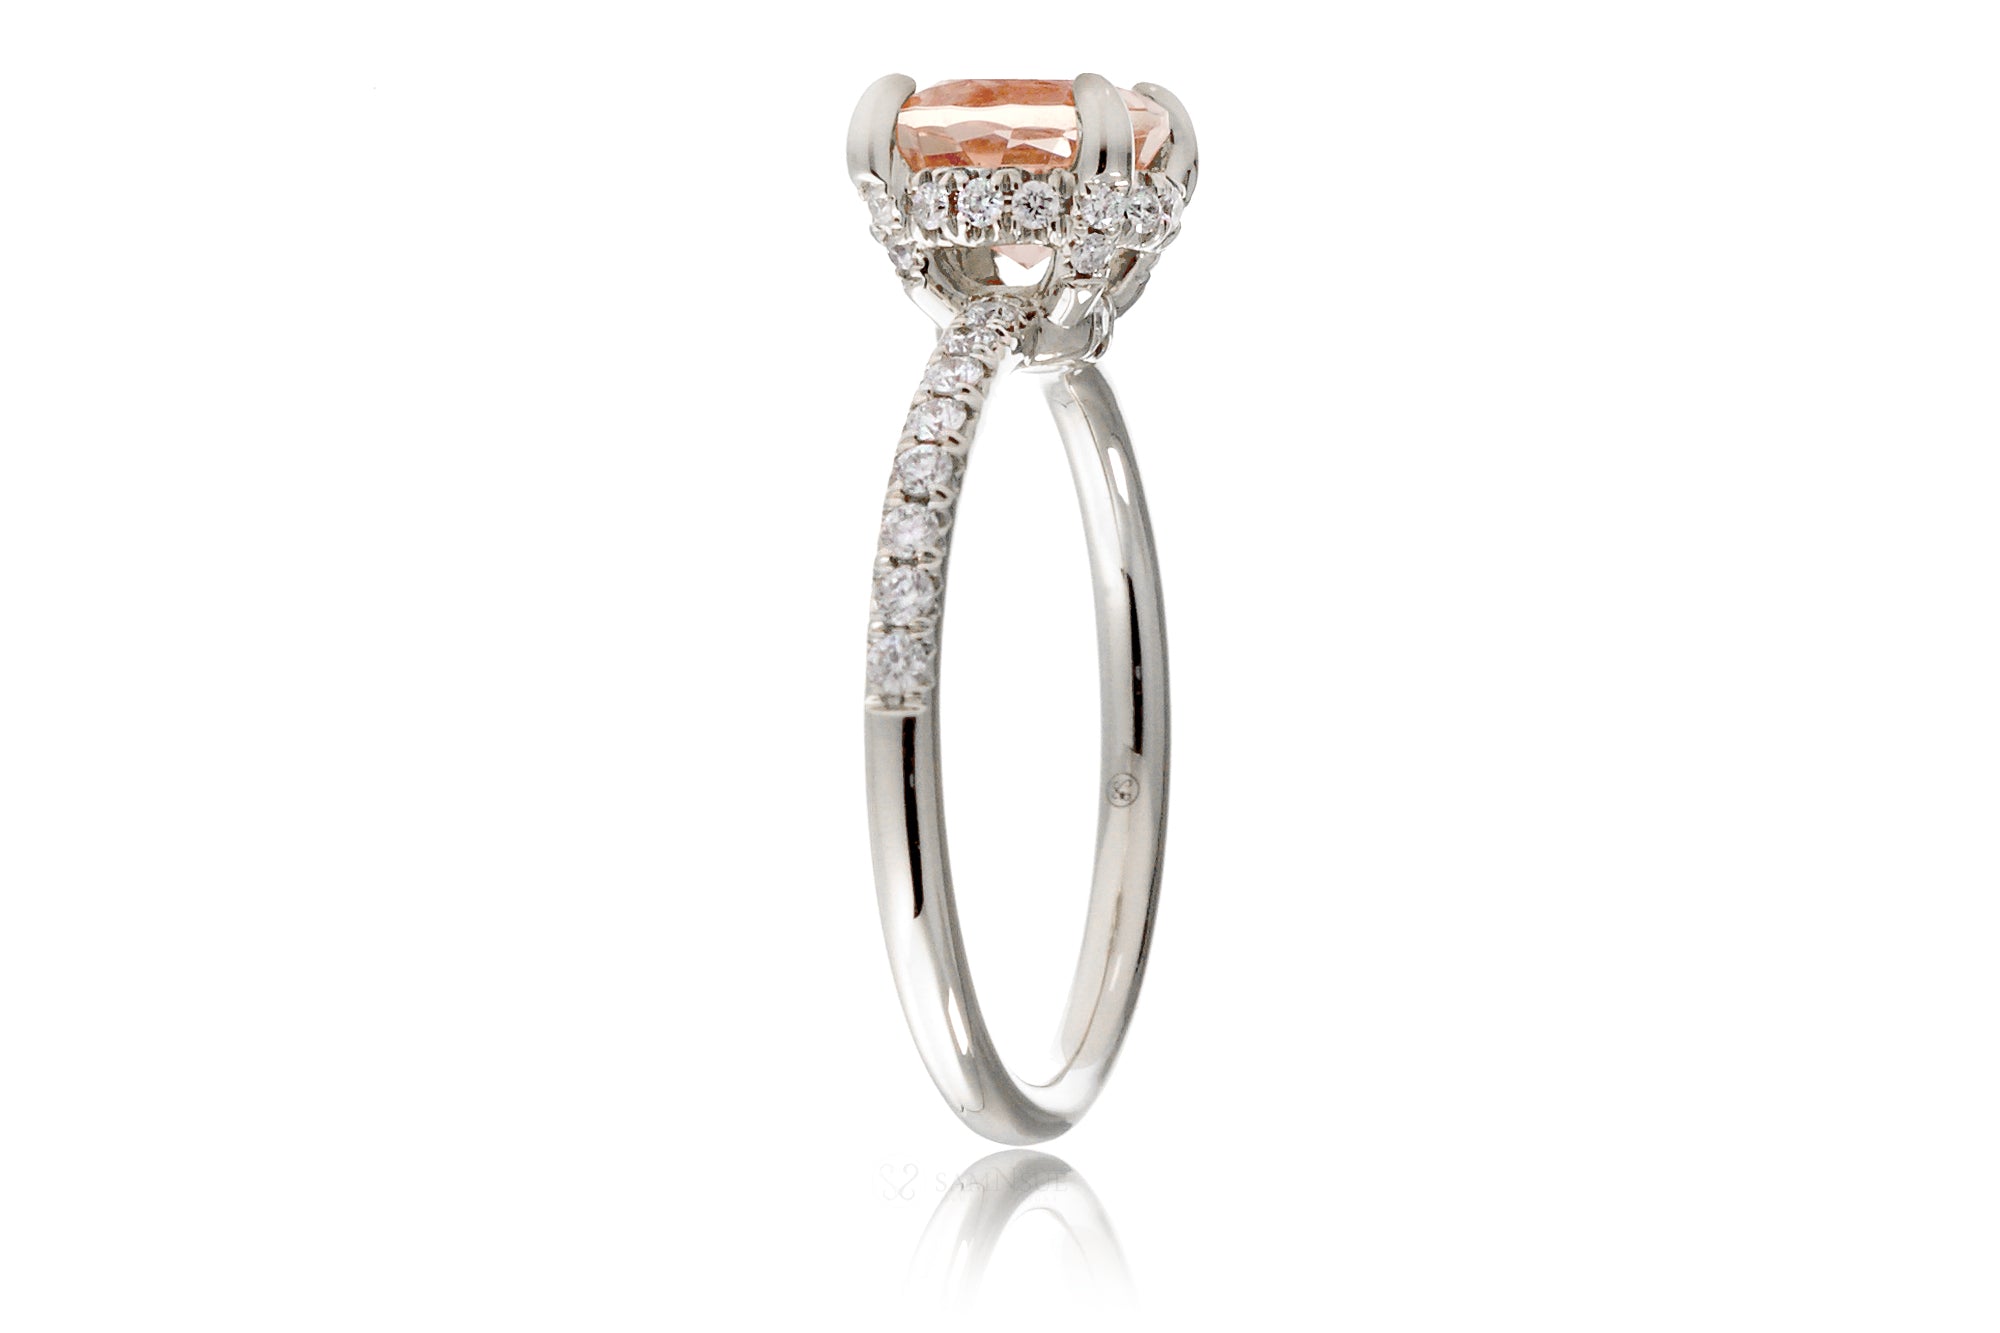 The Drenched Solitaire Round Morganite